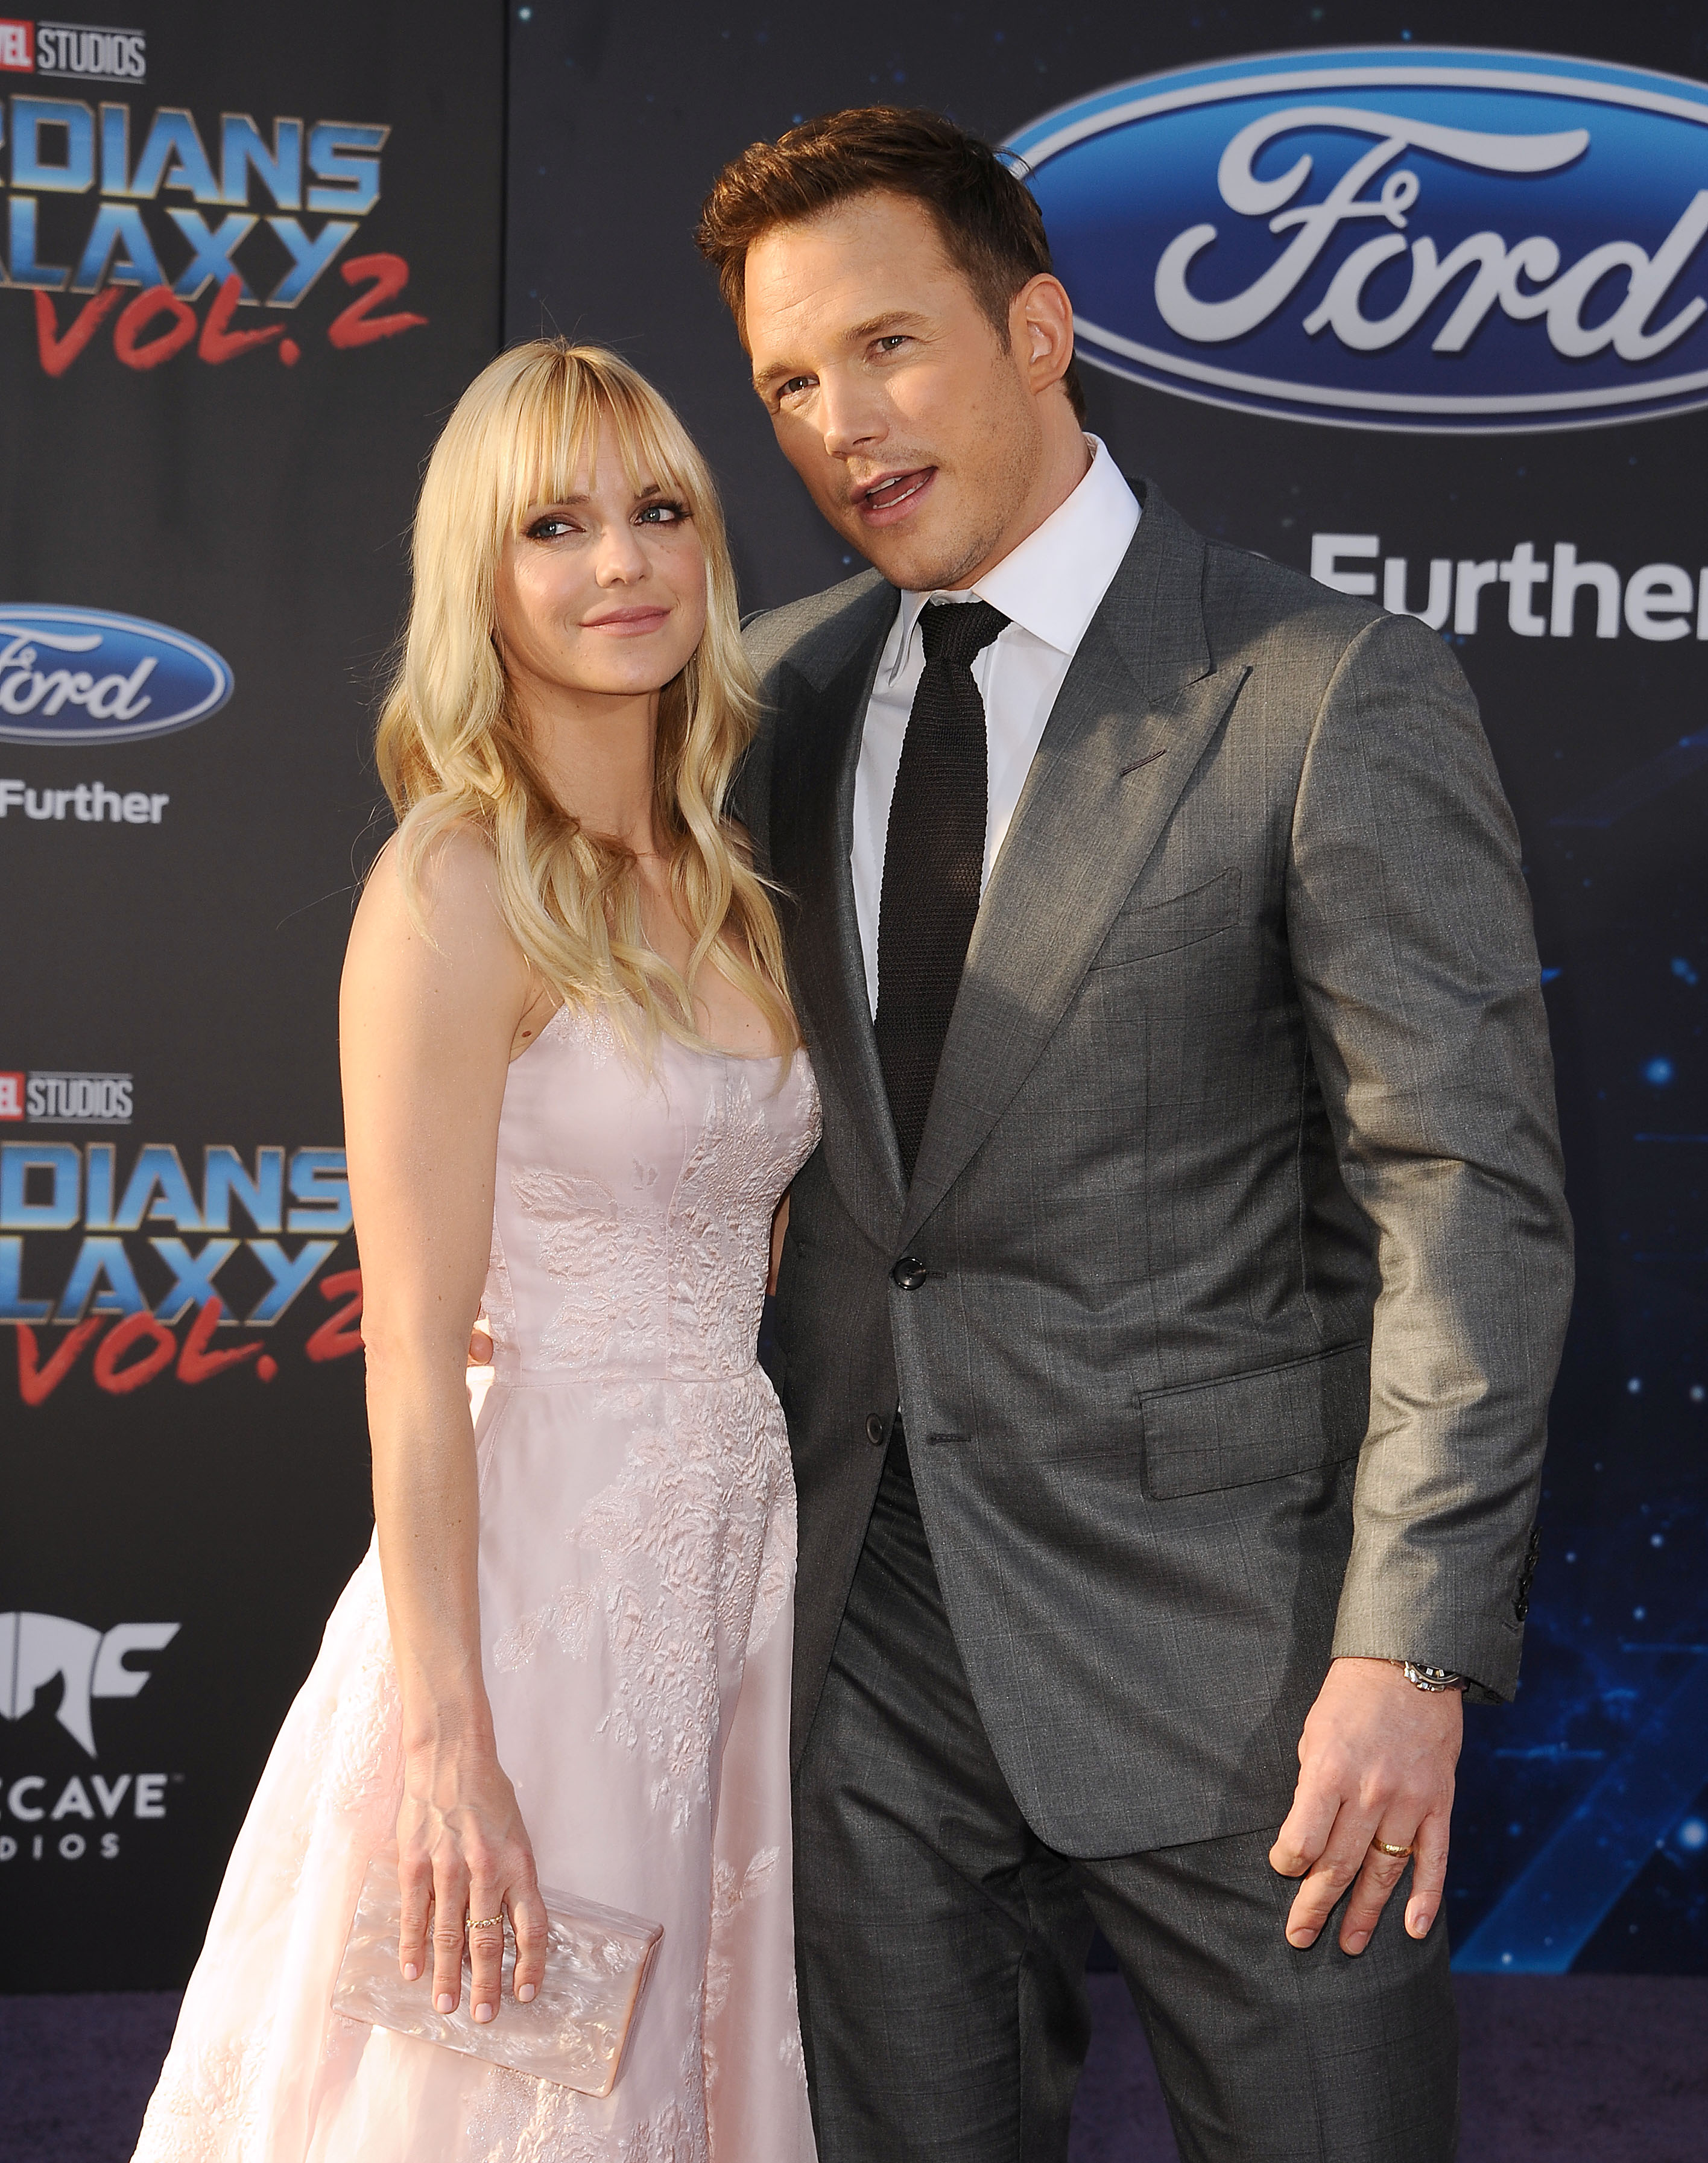 Anna Faris and Chris Pratt attend the premiere of "Guardians of the Galaxy Vol. 2" at Dolby Theatre in Hollywood, California on April 19, 2017. | Source: Getty Images